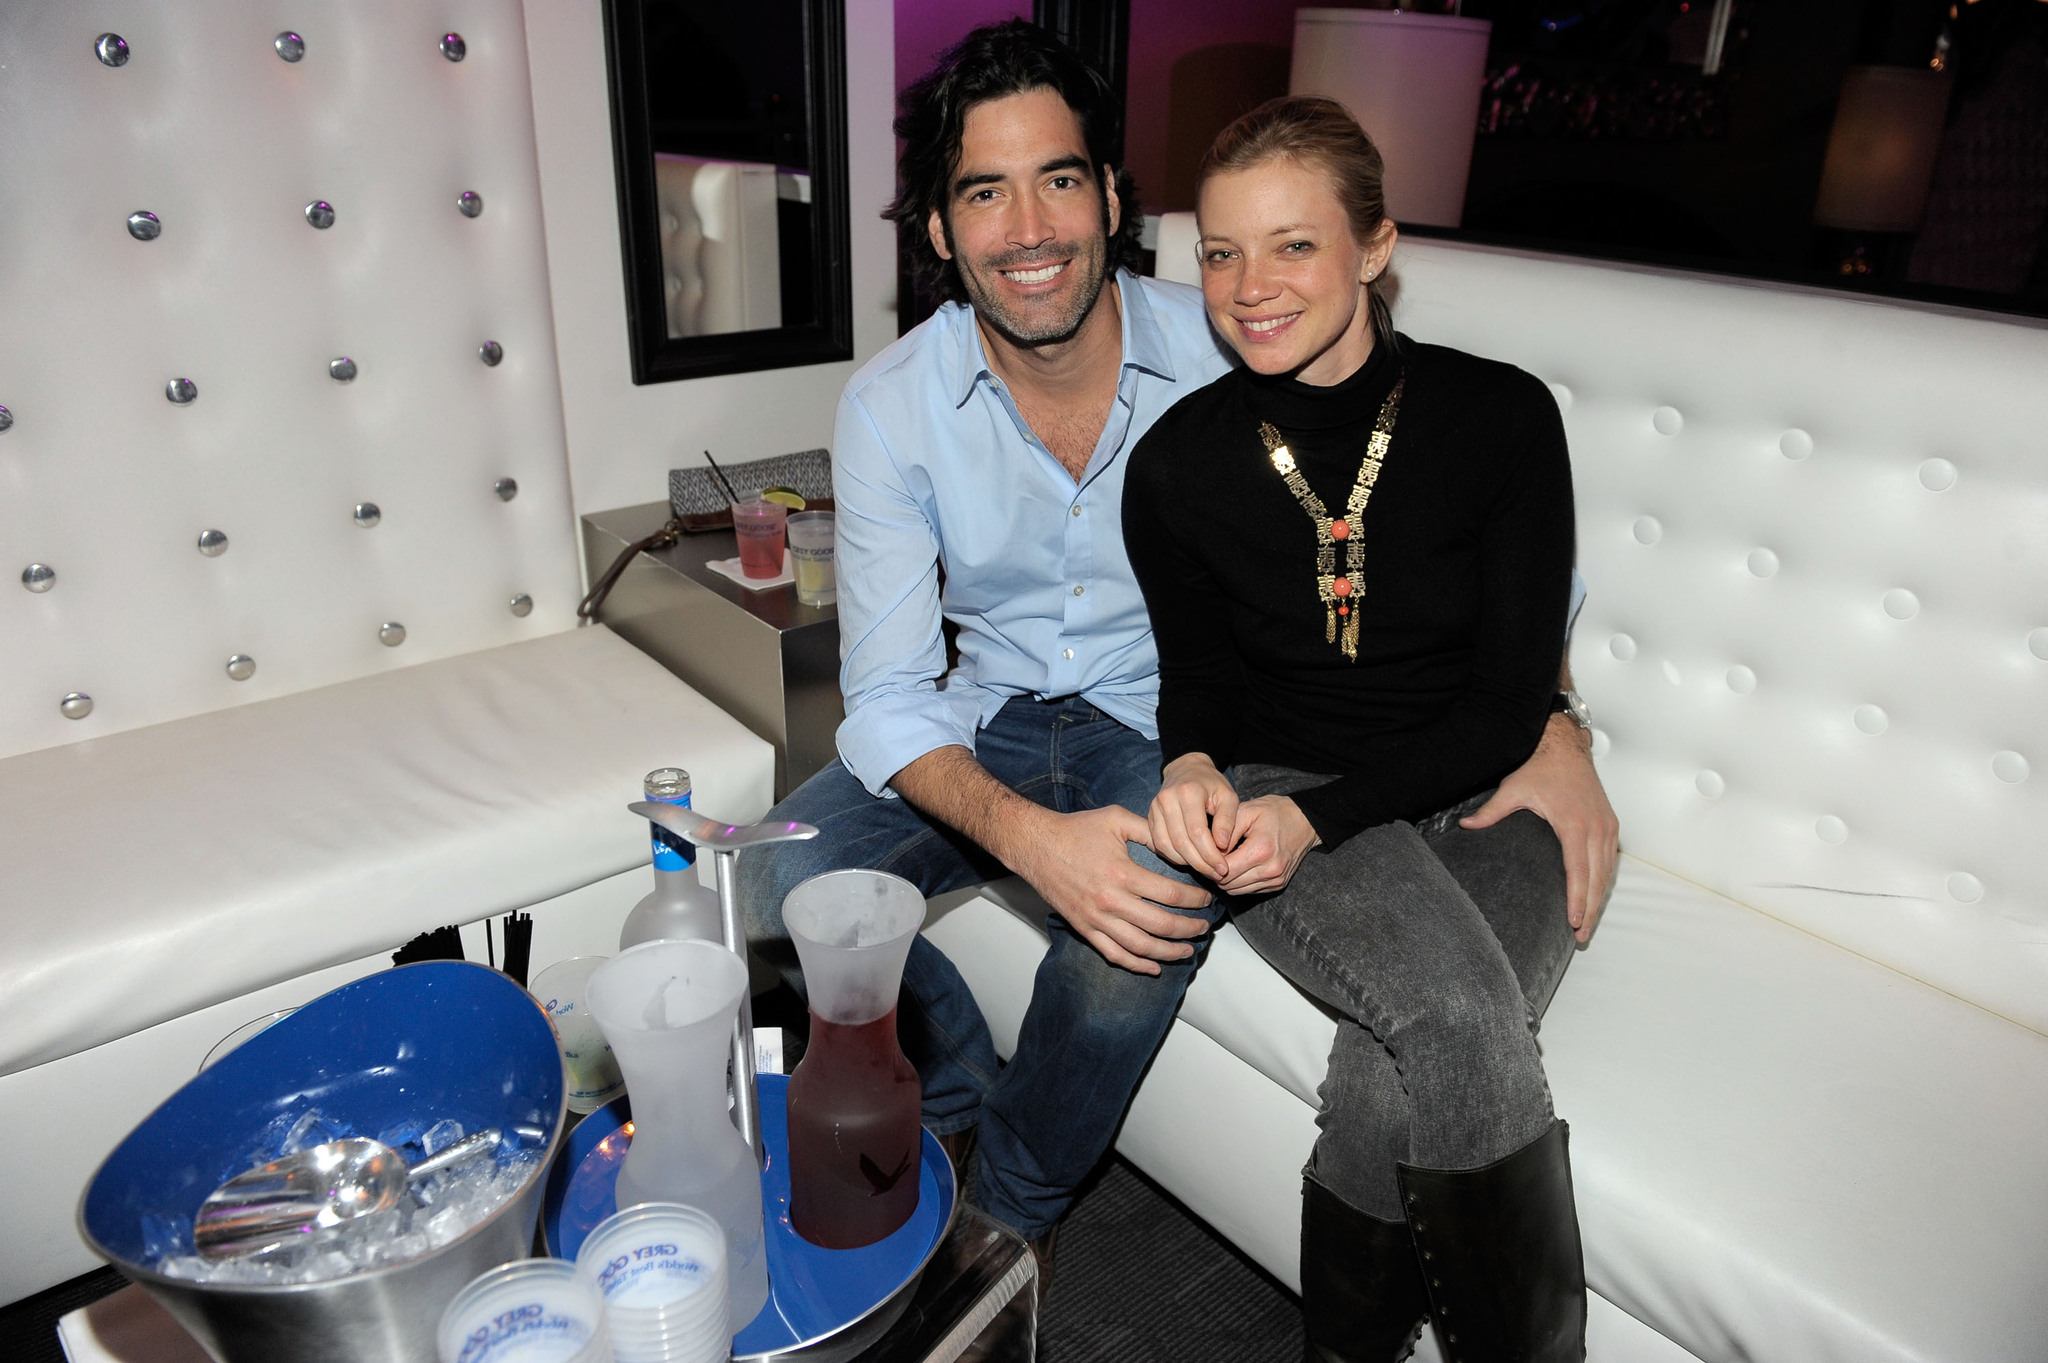 Amy Smart and Carter Oosterhouse